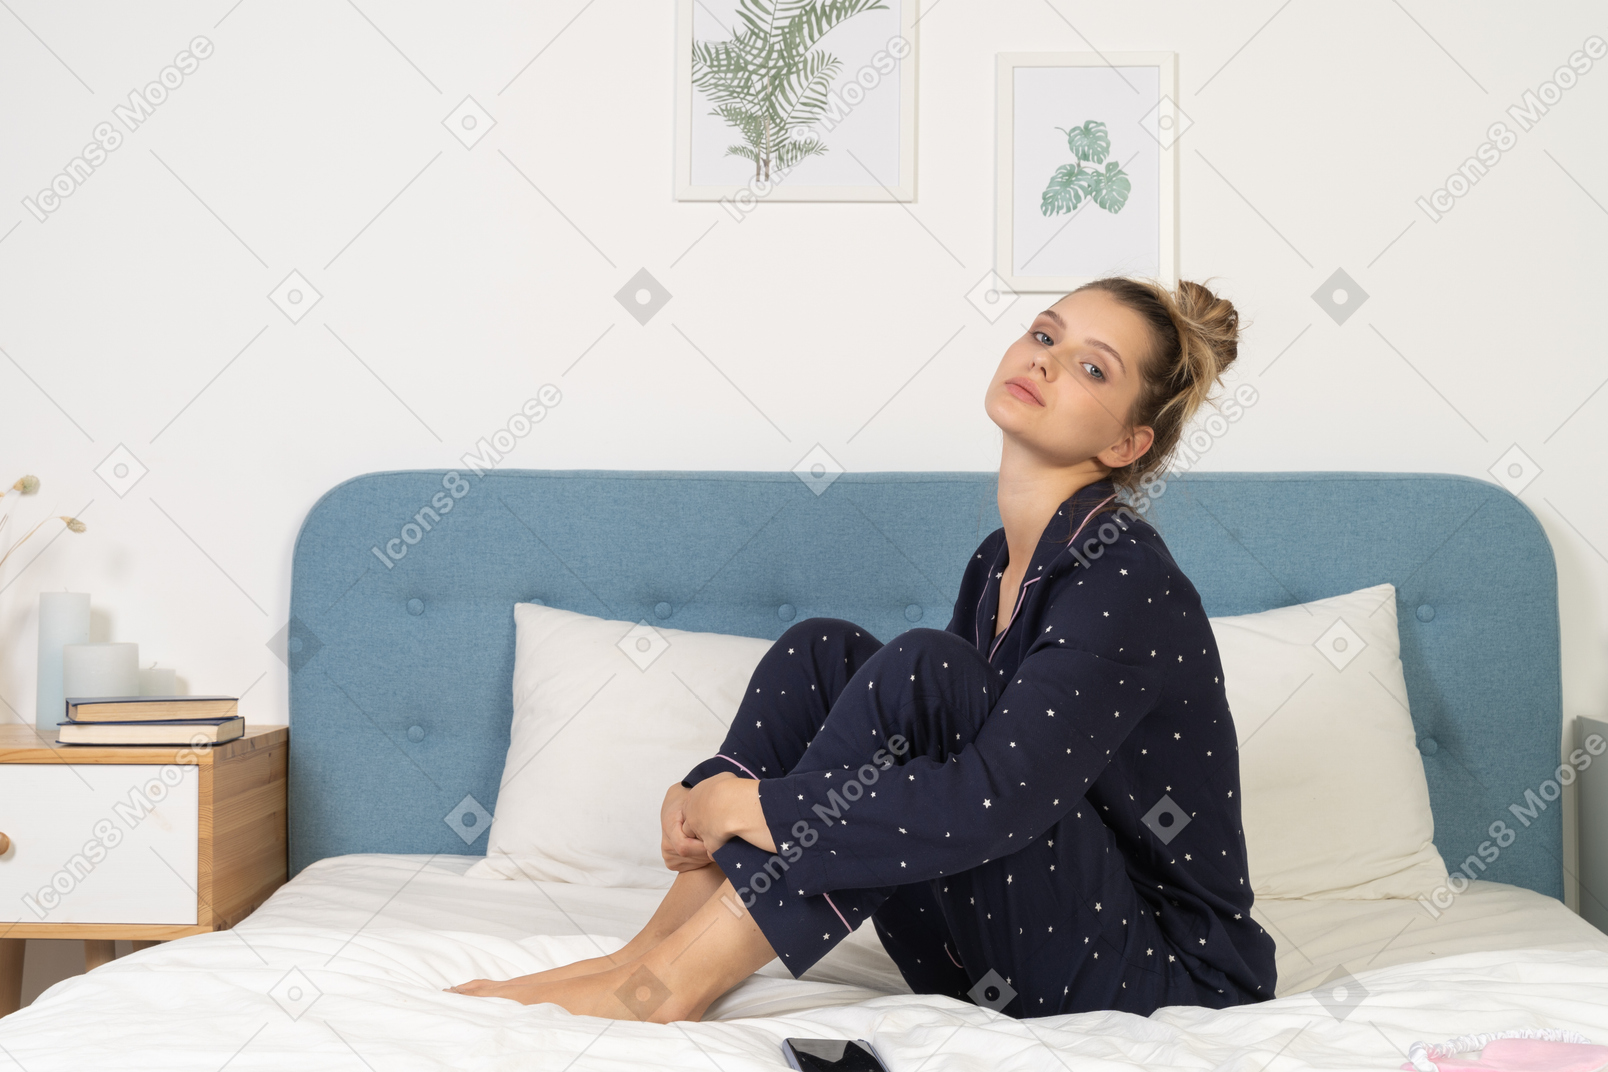 Side view of a bored young lady in pajamas staying in bed